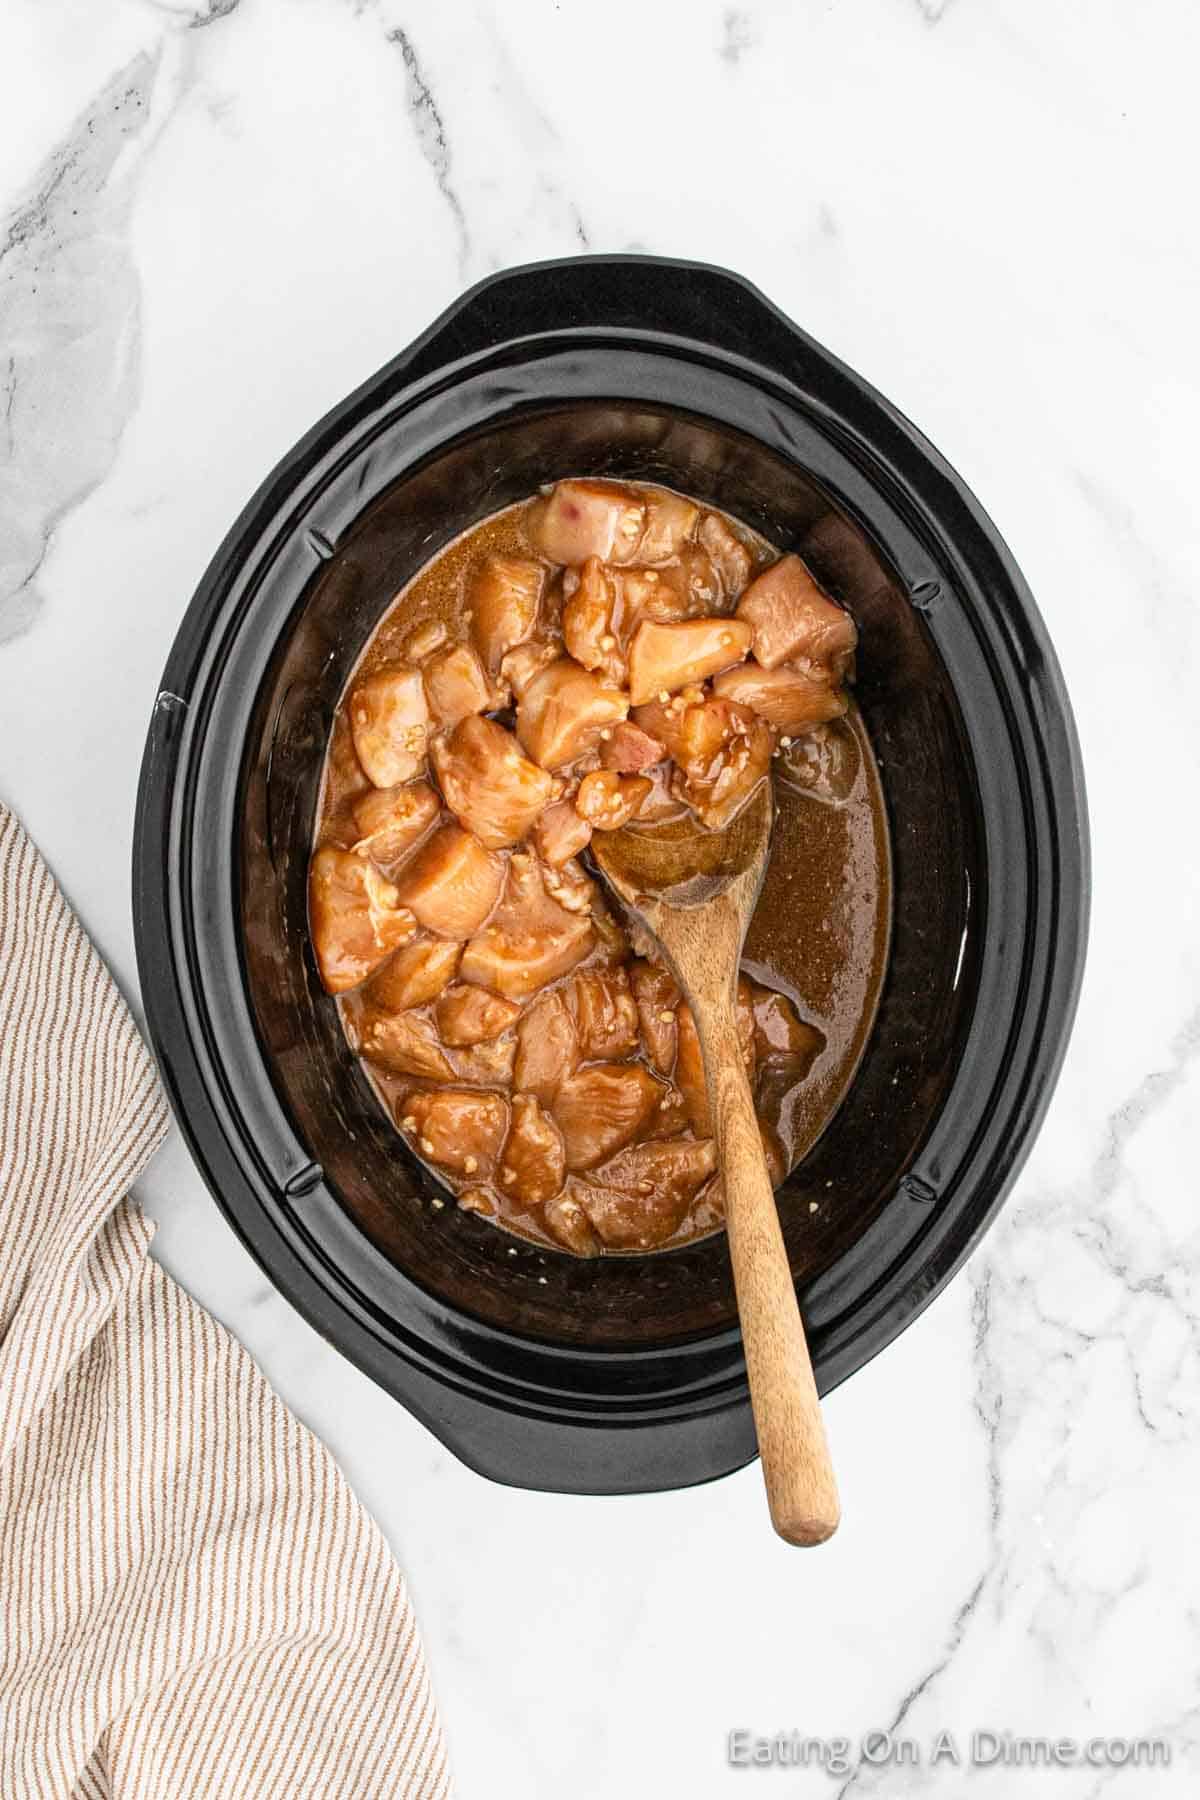 Combining the chicken into the sauce in the slow cooker with a wooden spoon